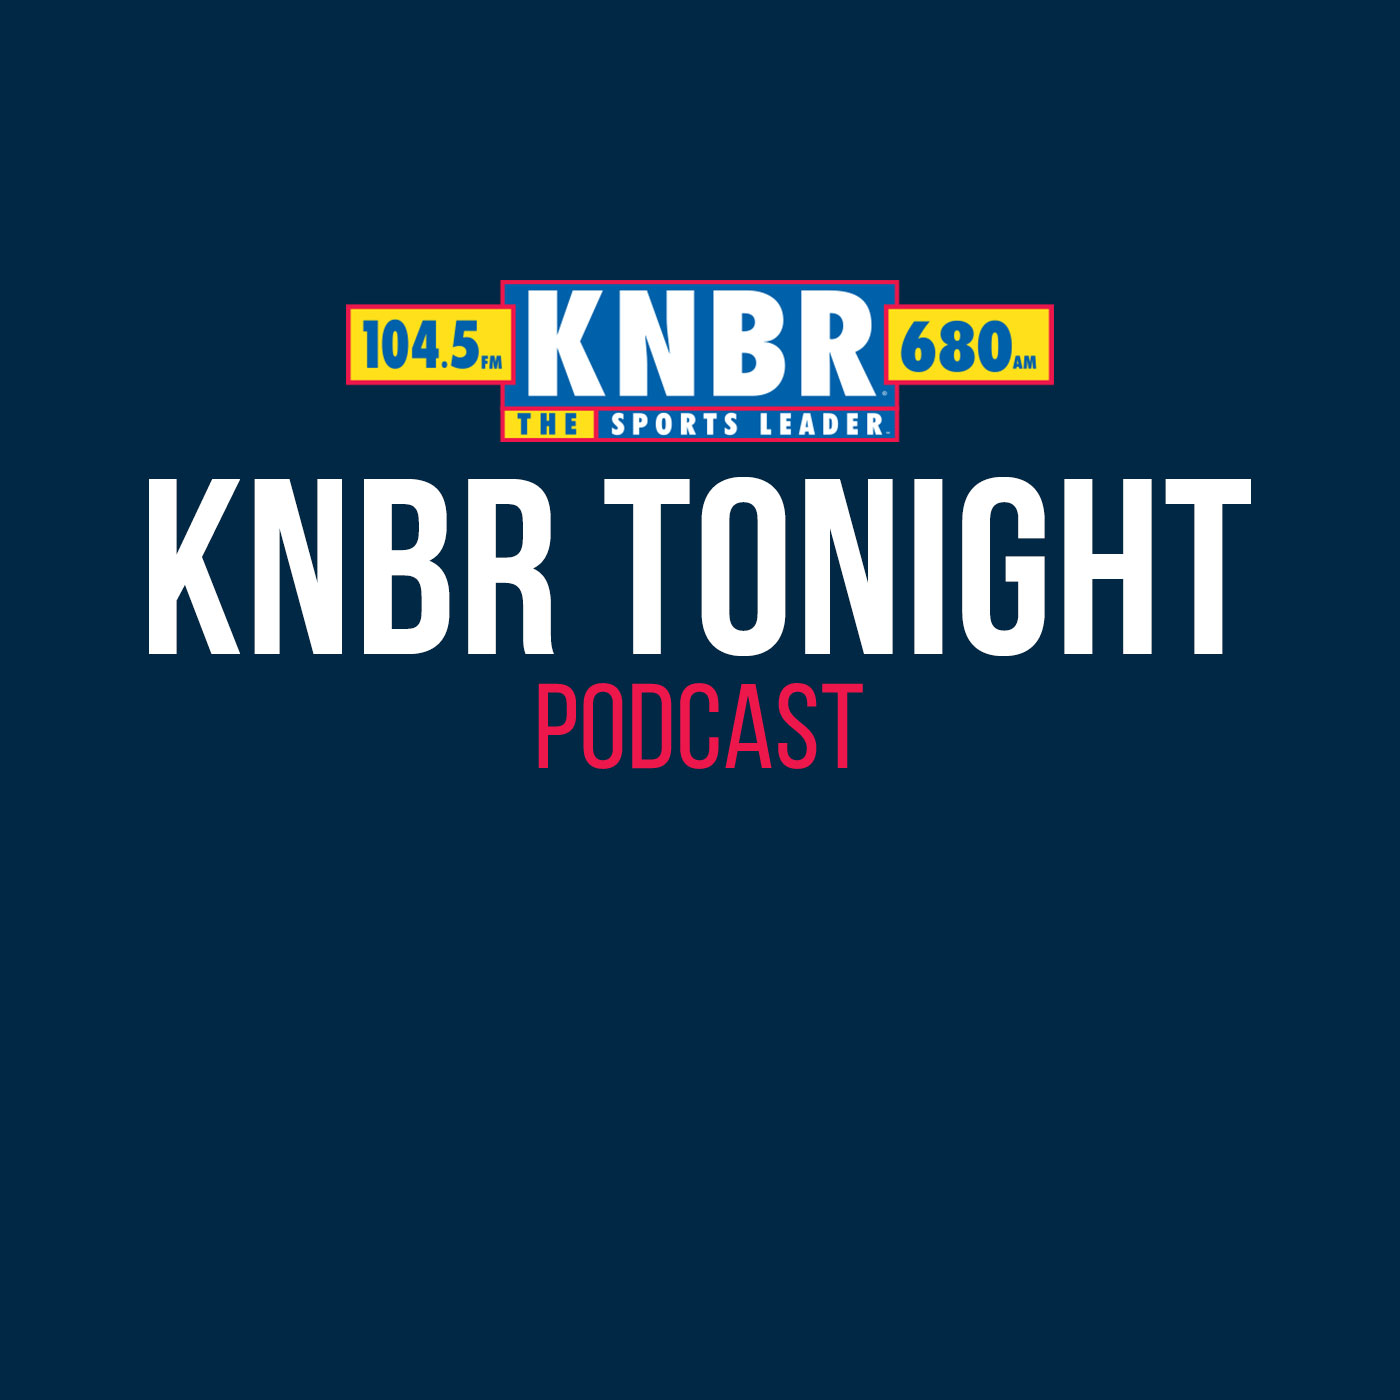 3-15 Jessica Kleinschmidt joins KNBR Tonight to react to the Matt Olsen trade and lists who else may be on the move in the near future